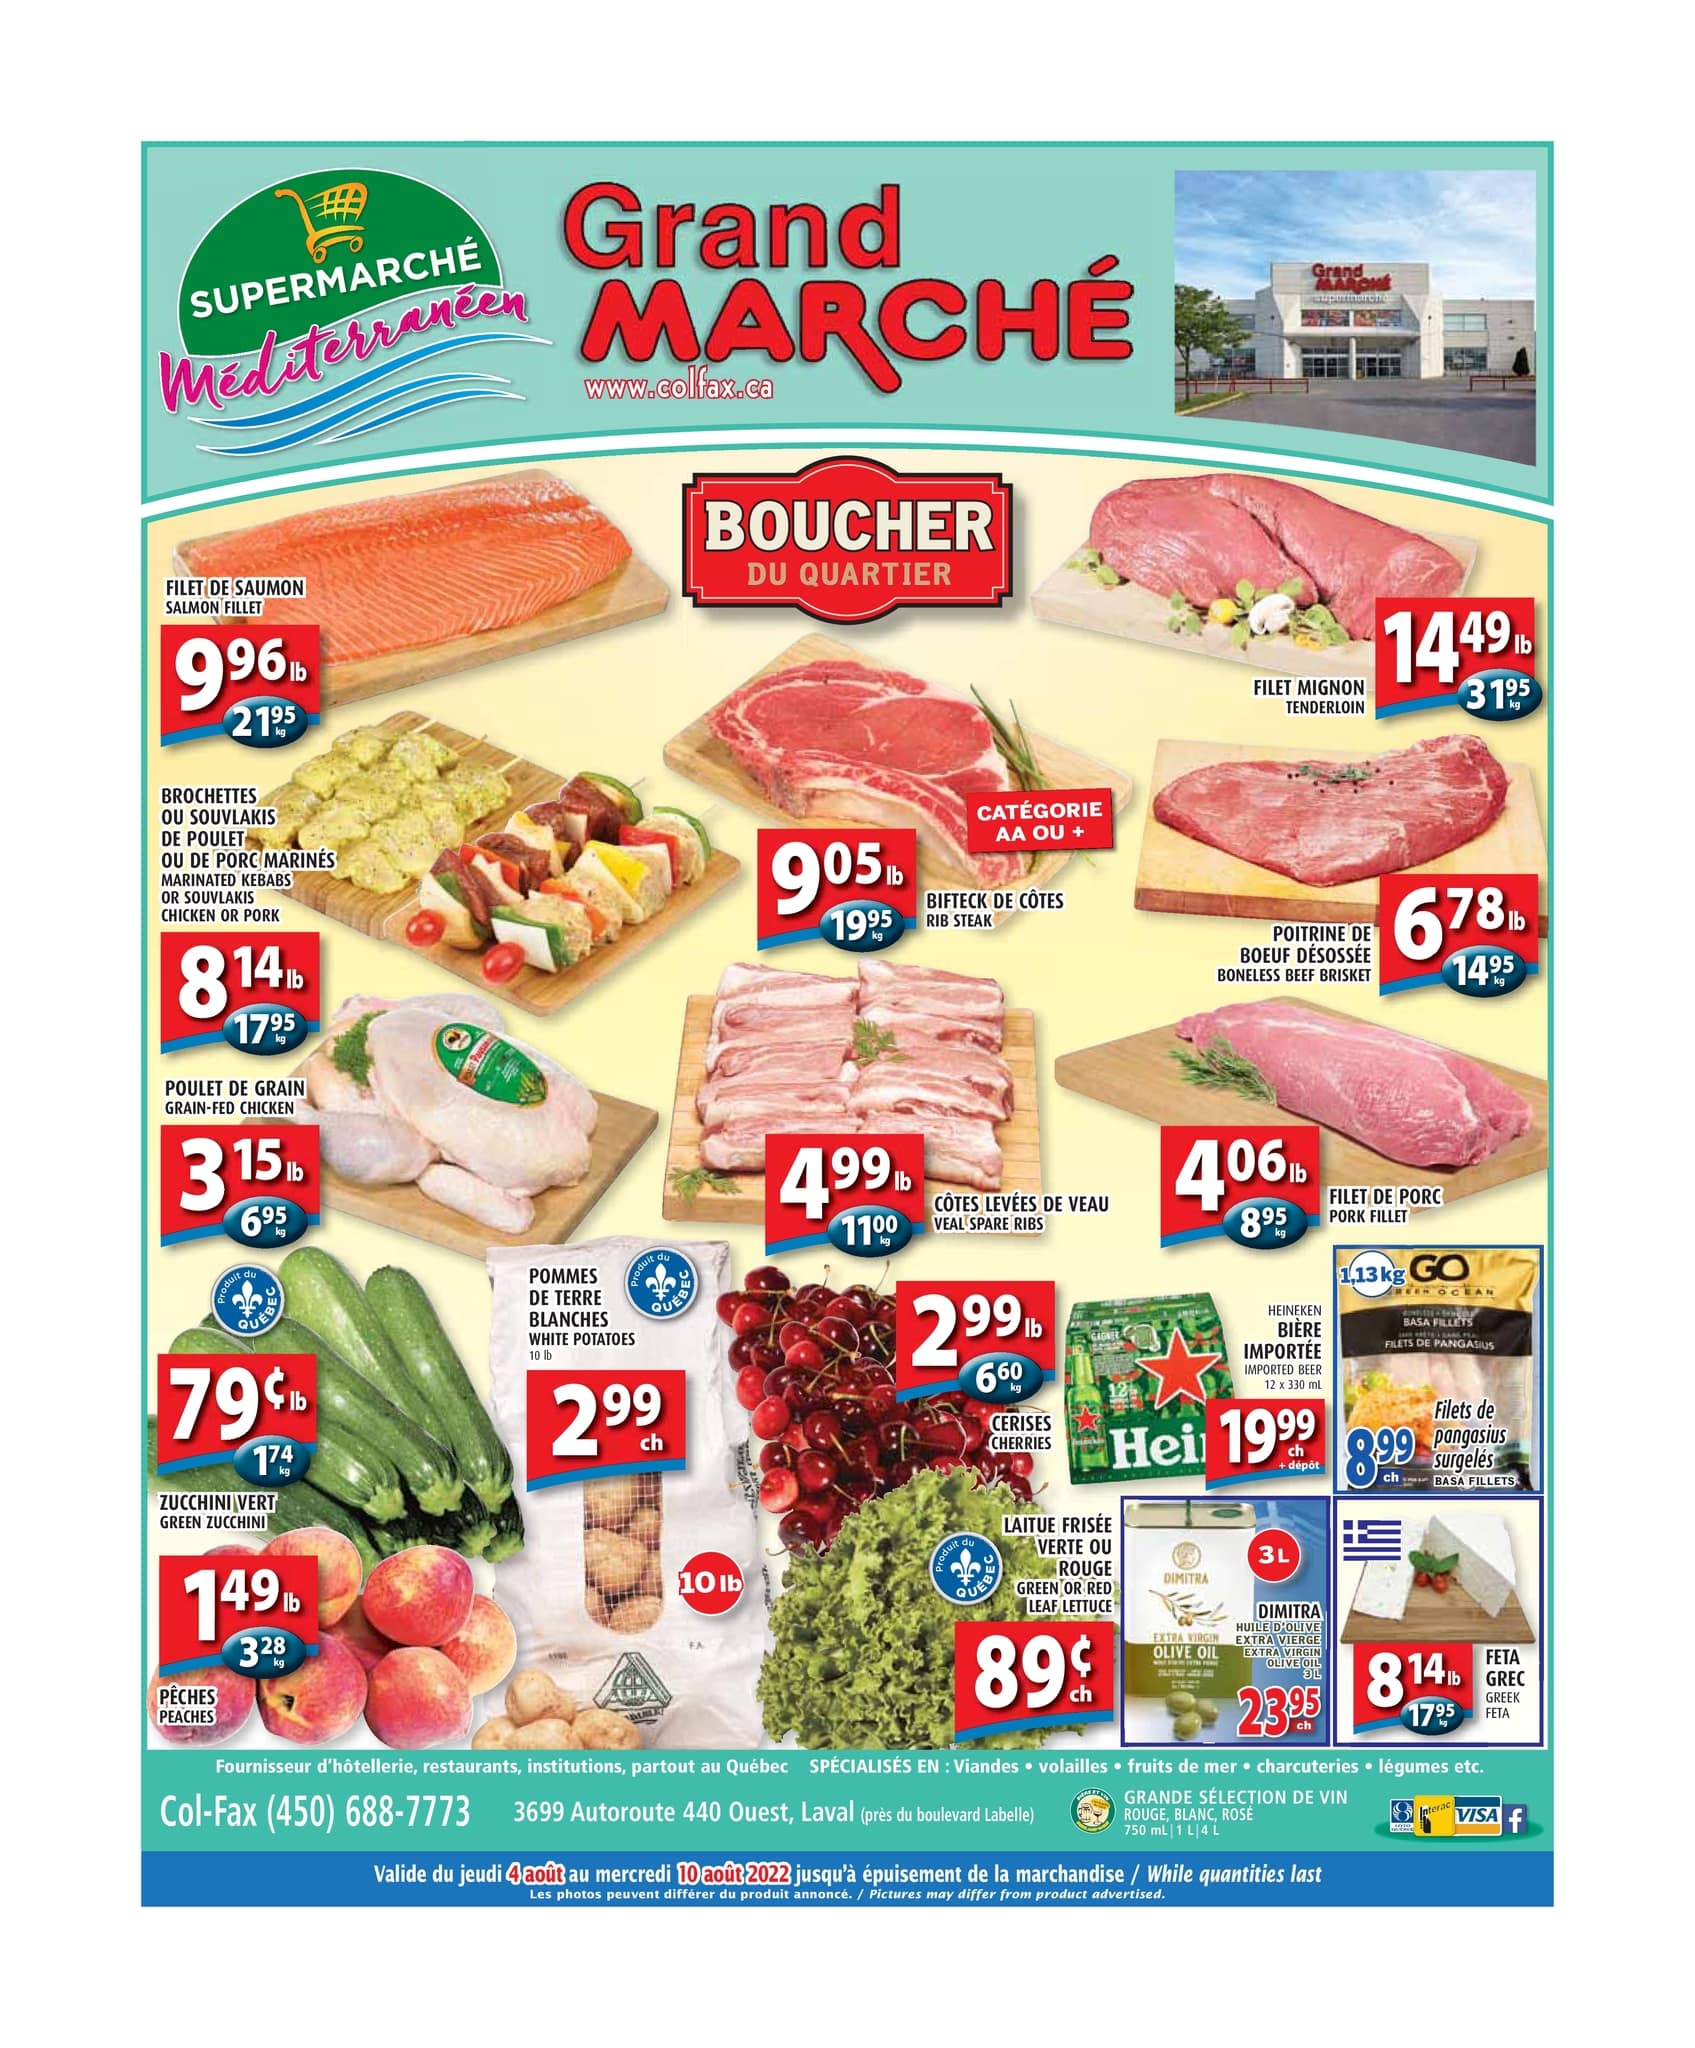 Circulaire Grand Marché Laval - Page 1